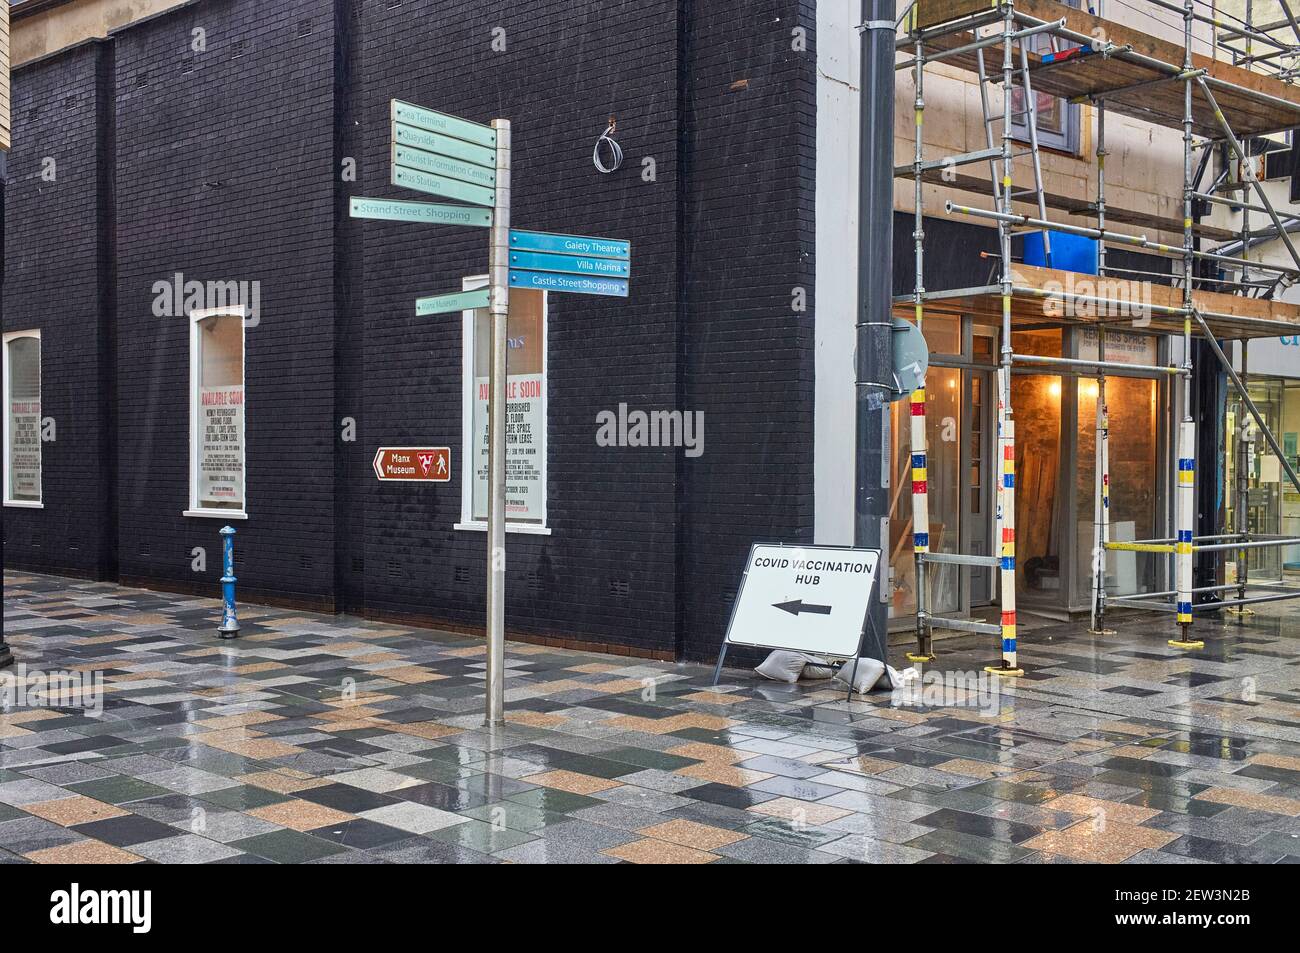 A direction sign for the Covid vaccination hub in the main shopping street of Douglas, Isle of Man on a rainy day Stock Photo